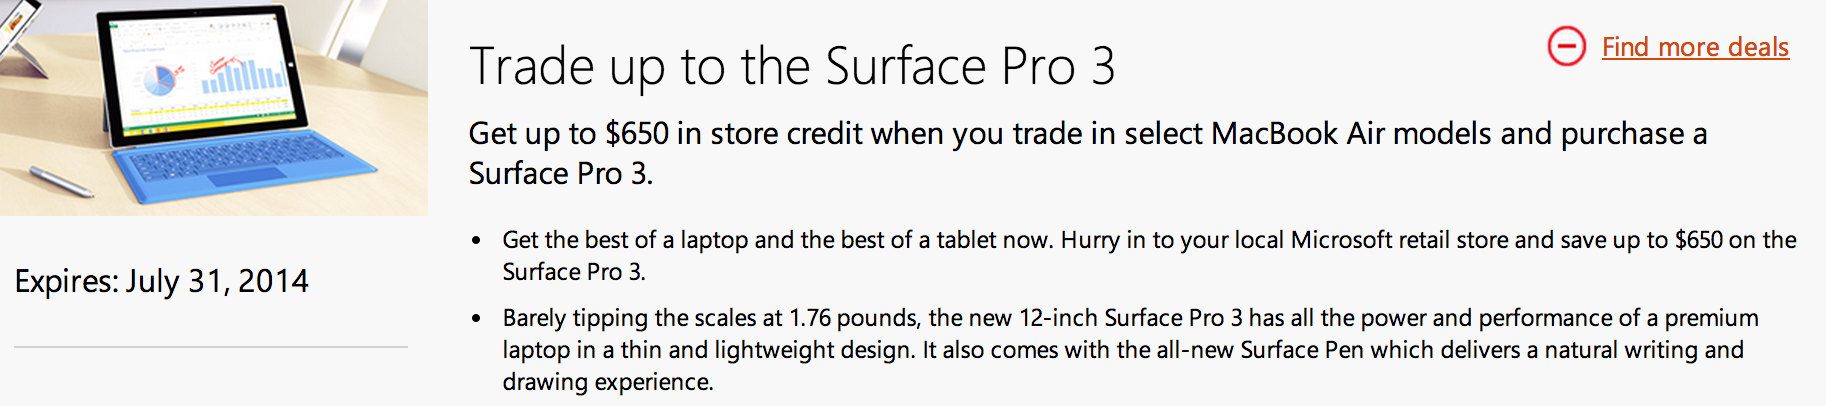 Surface-Pro-3-Macbook-trade-in-offer